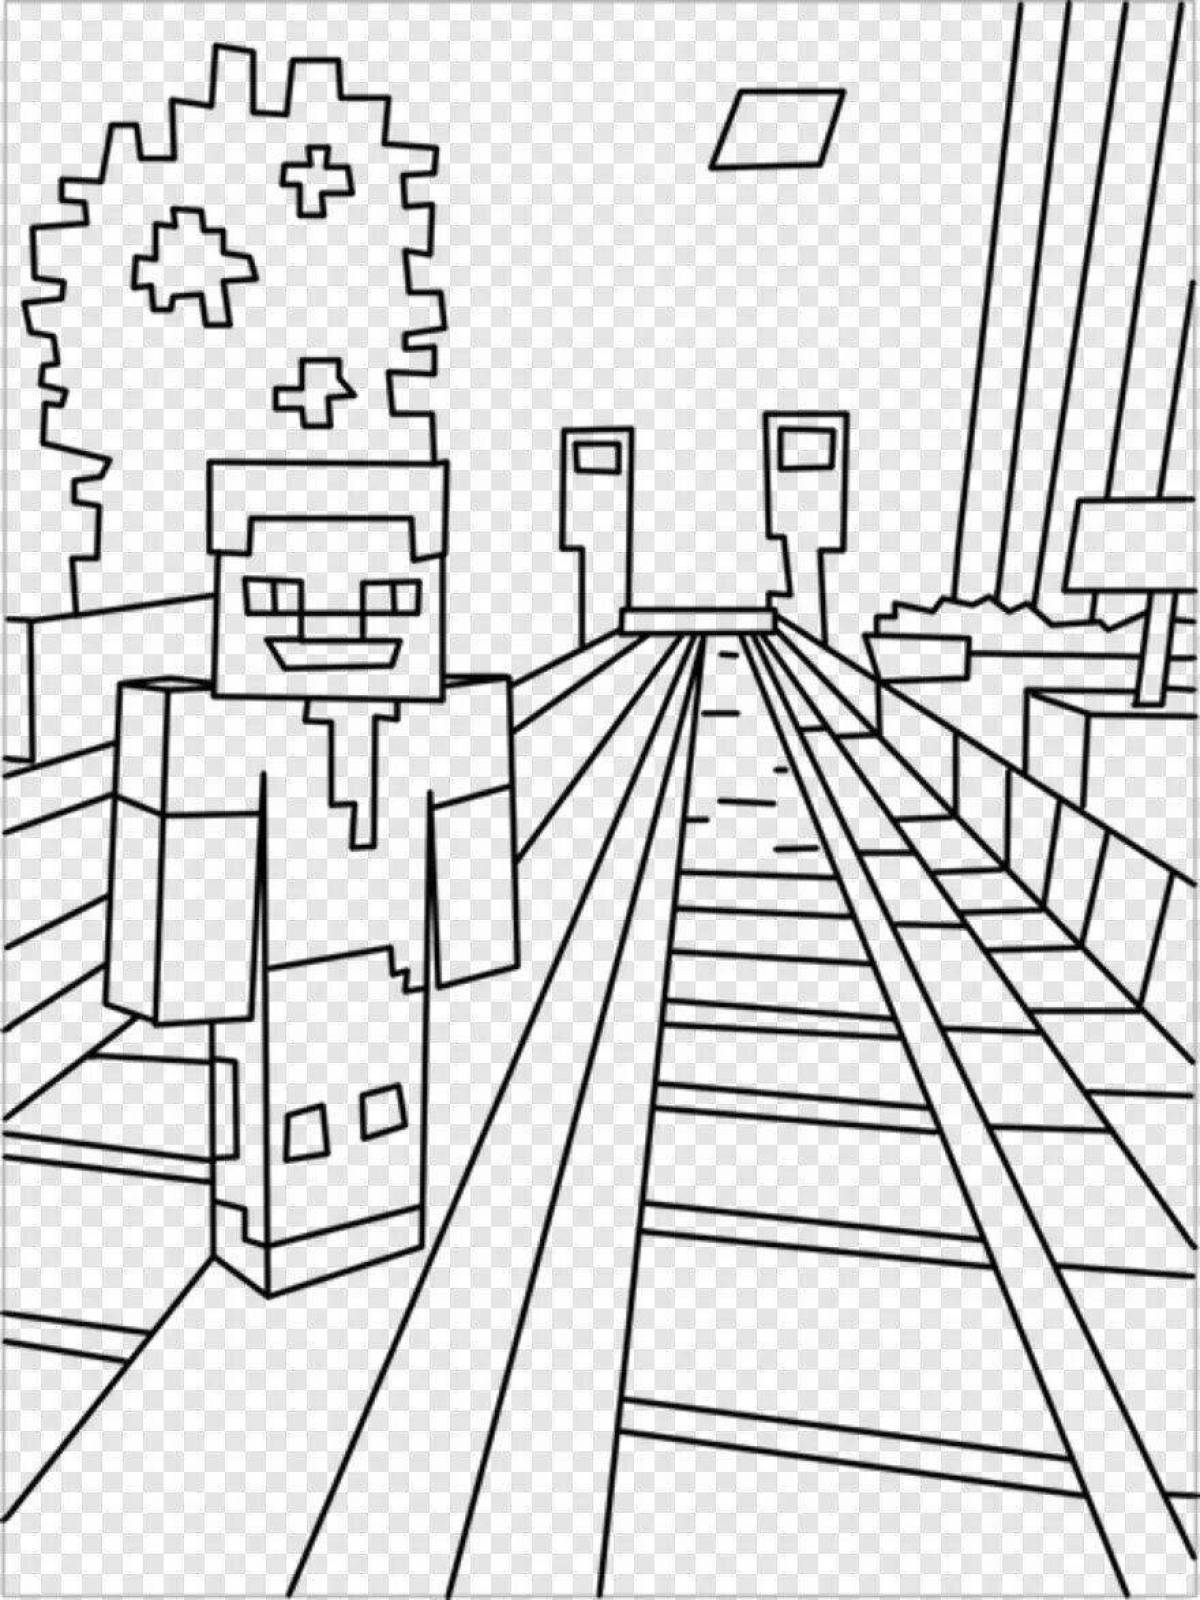 Awesome minecraft world coloring page